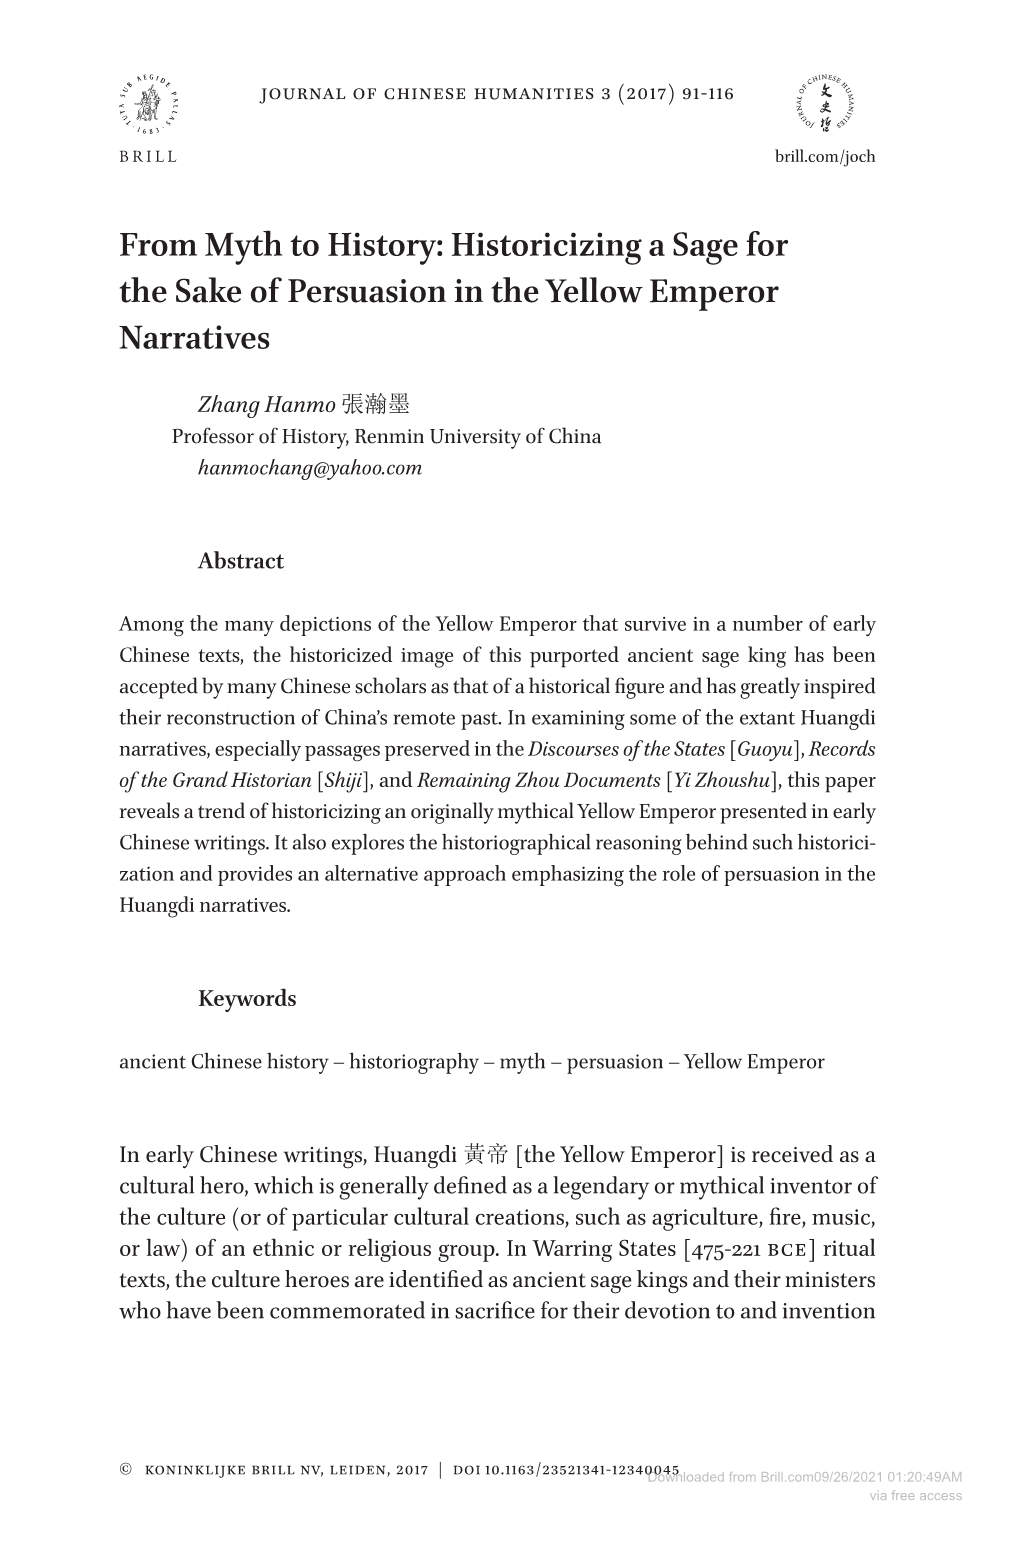 From Myth to History: Historicizing a Sage for the Sake of Persuasion in the Yellow Emperor Narratives